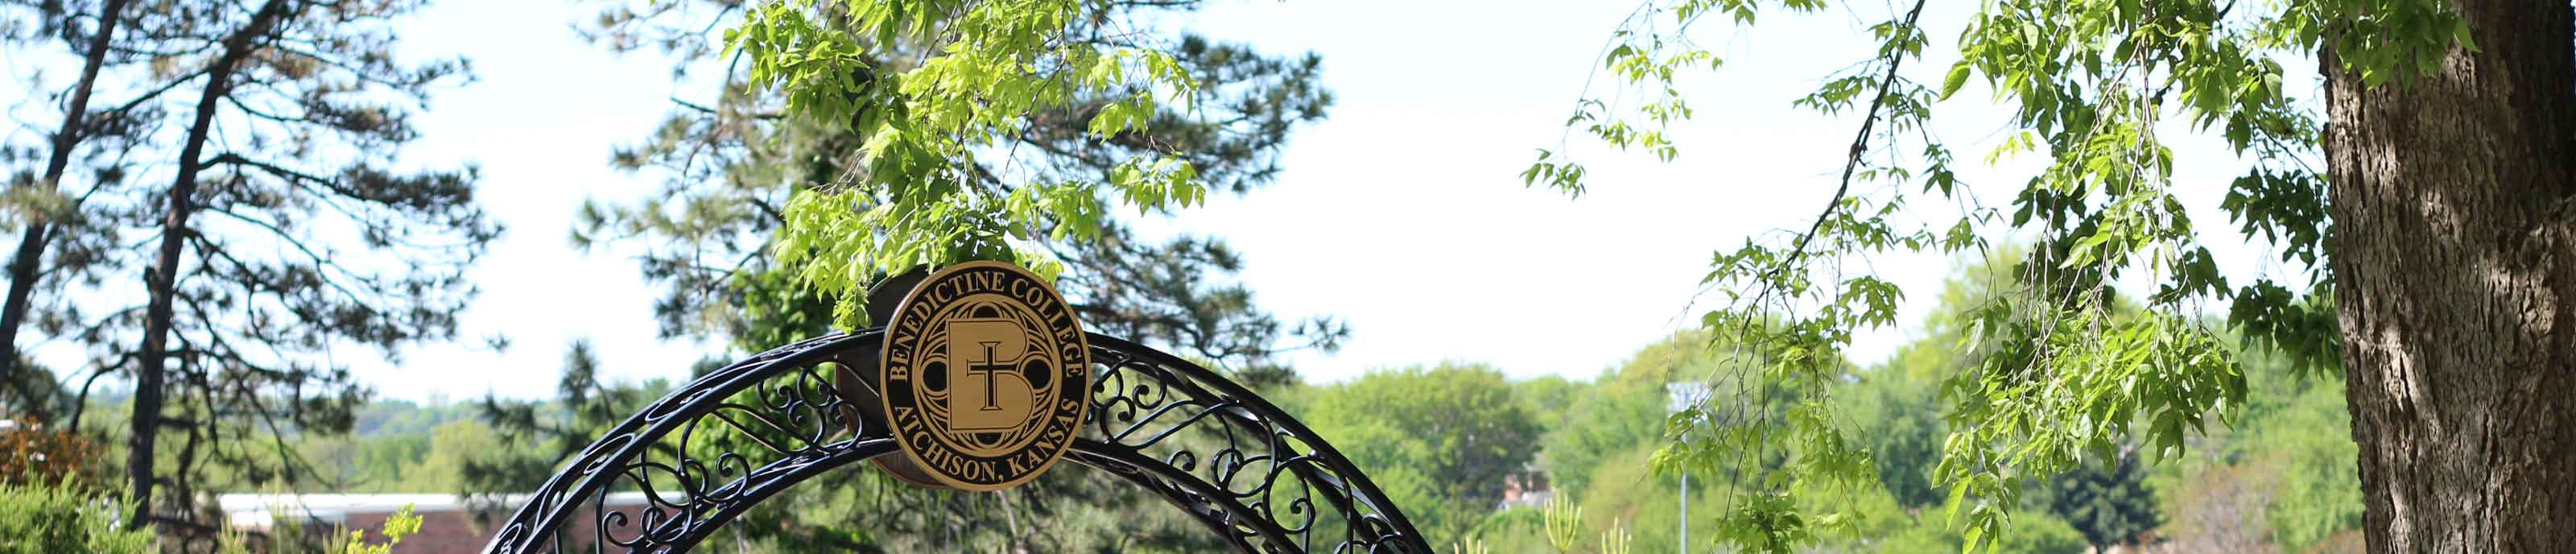 The Benedictine College Seal set atop the entry archway to Mary's Grotto